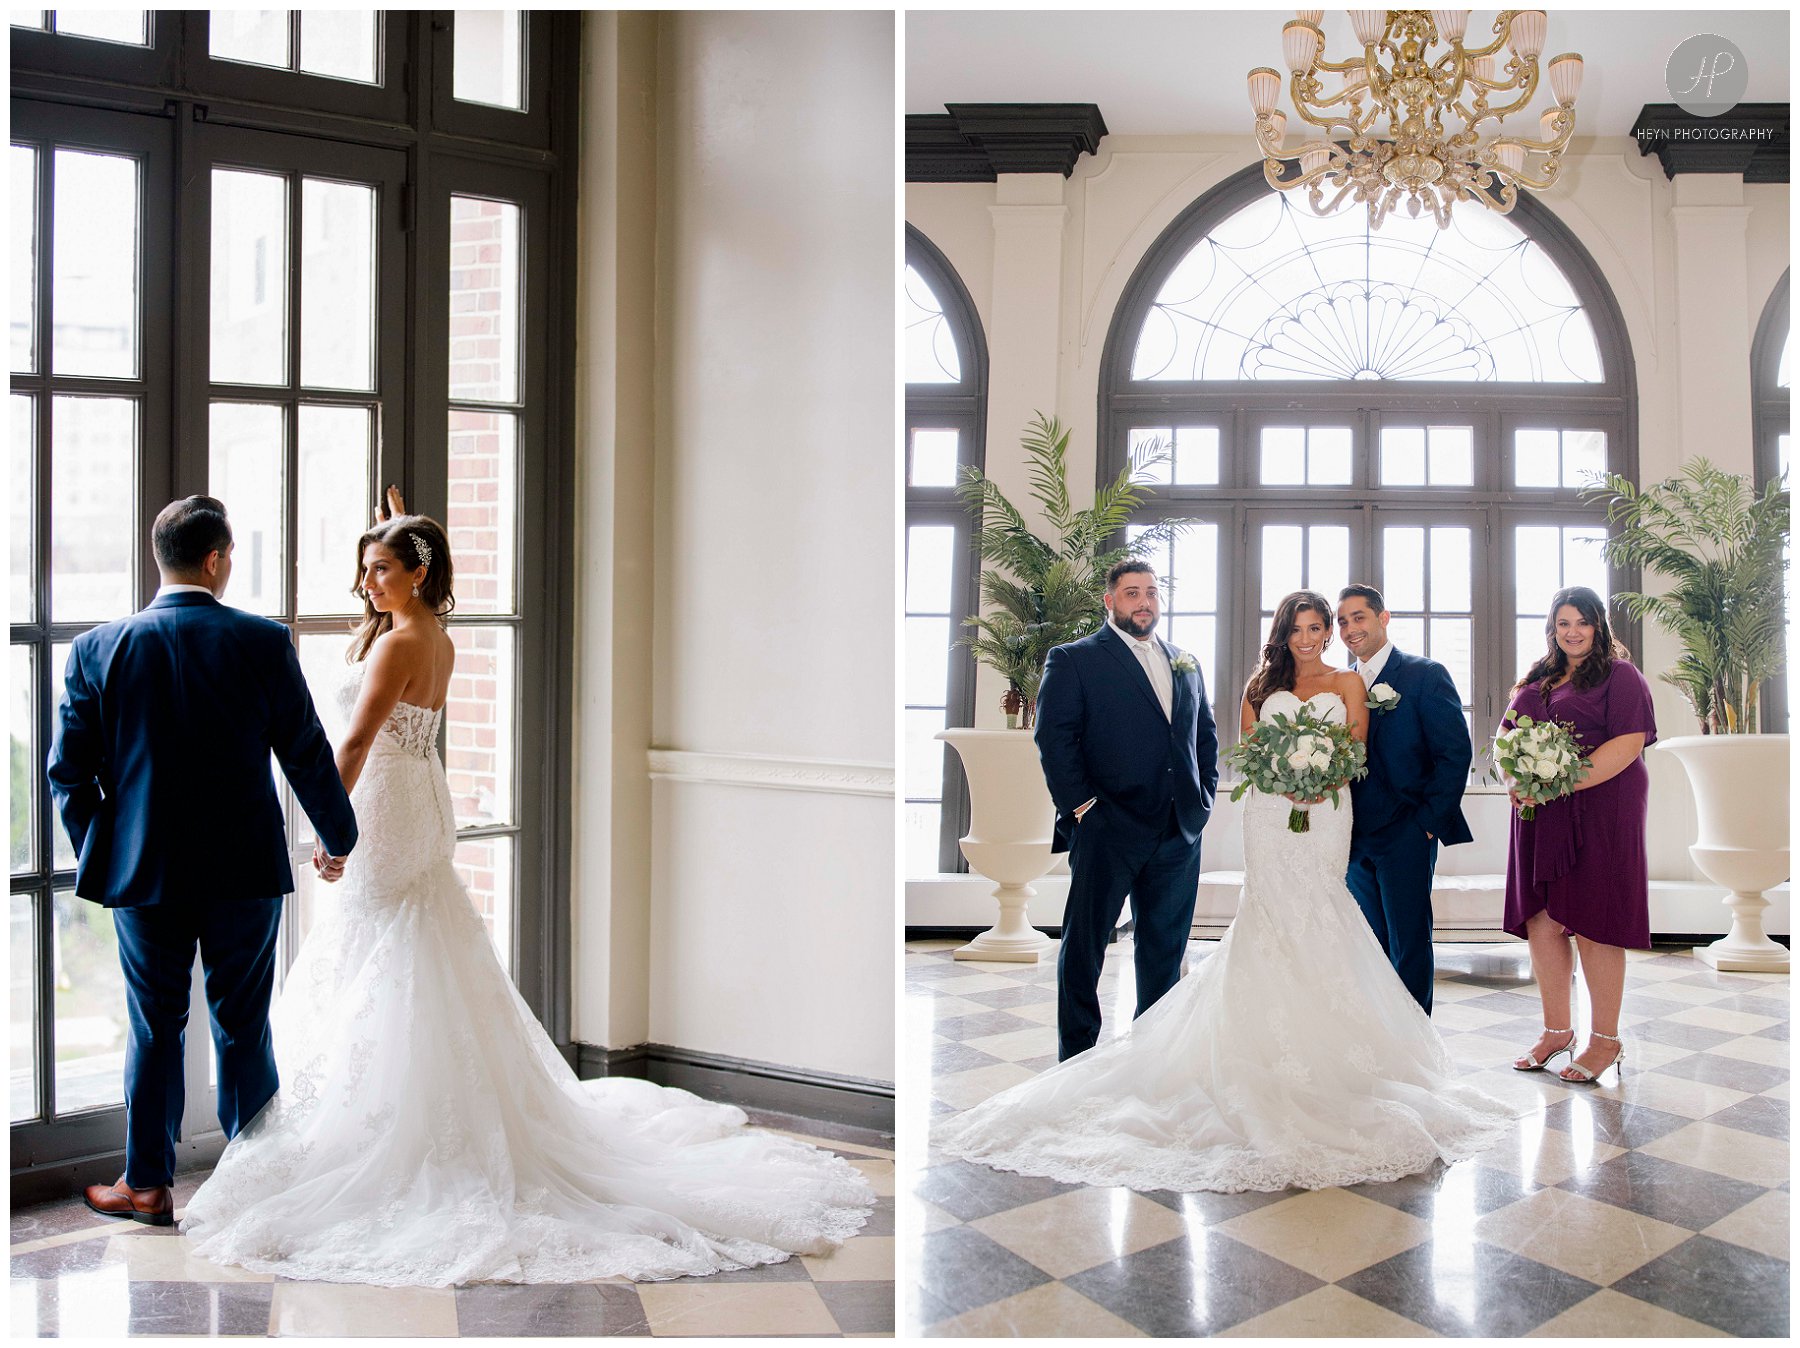 bride and groom at berkeley hotel at edgewater beach club wedding in new jersey